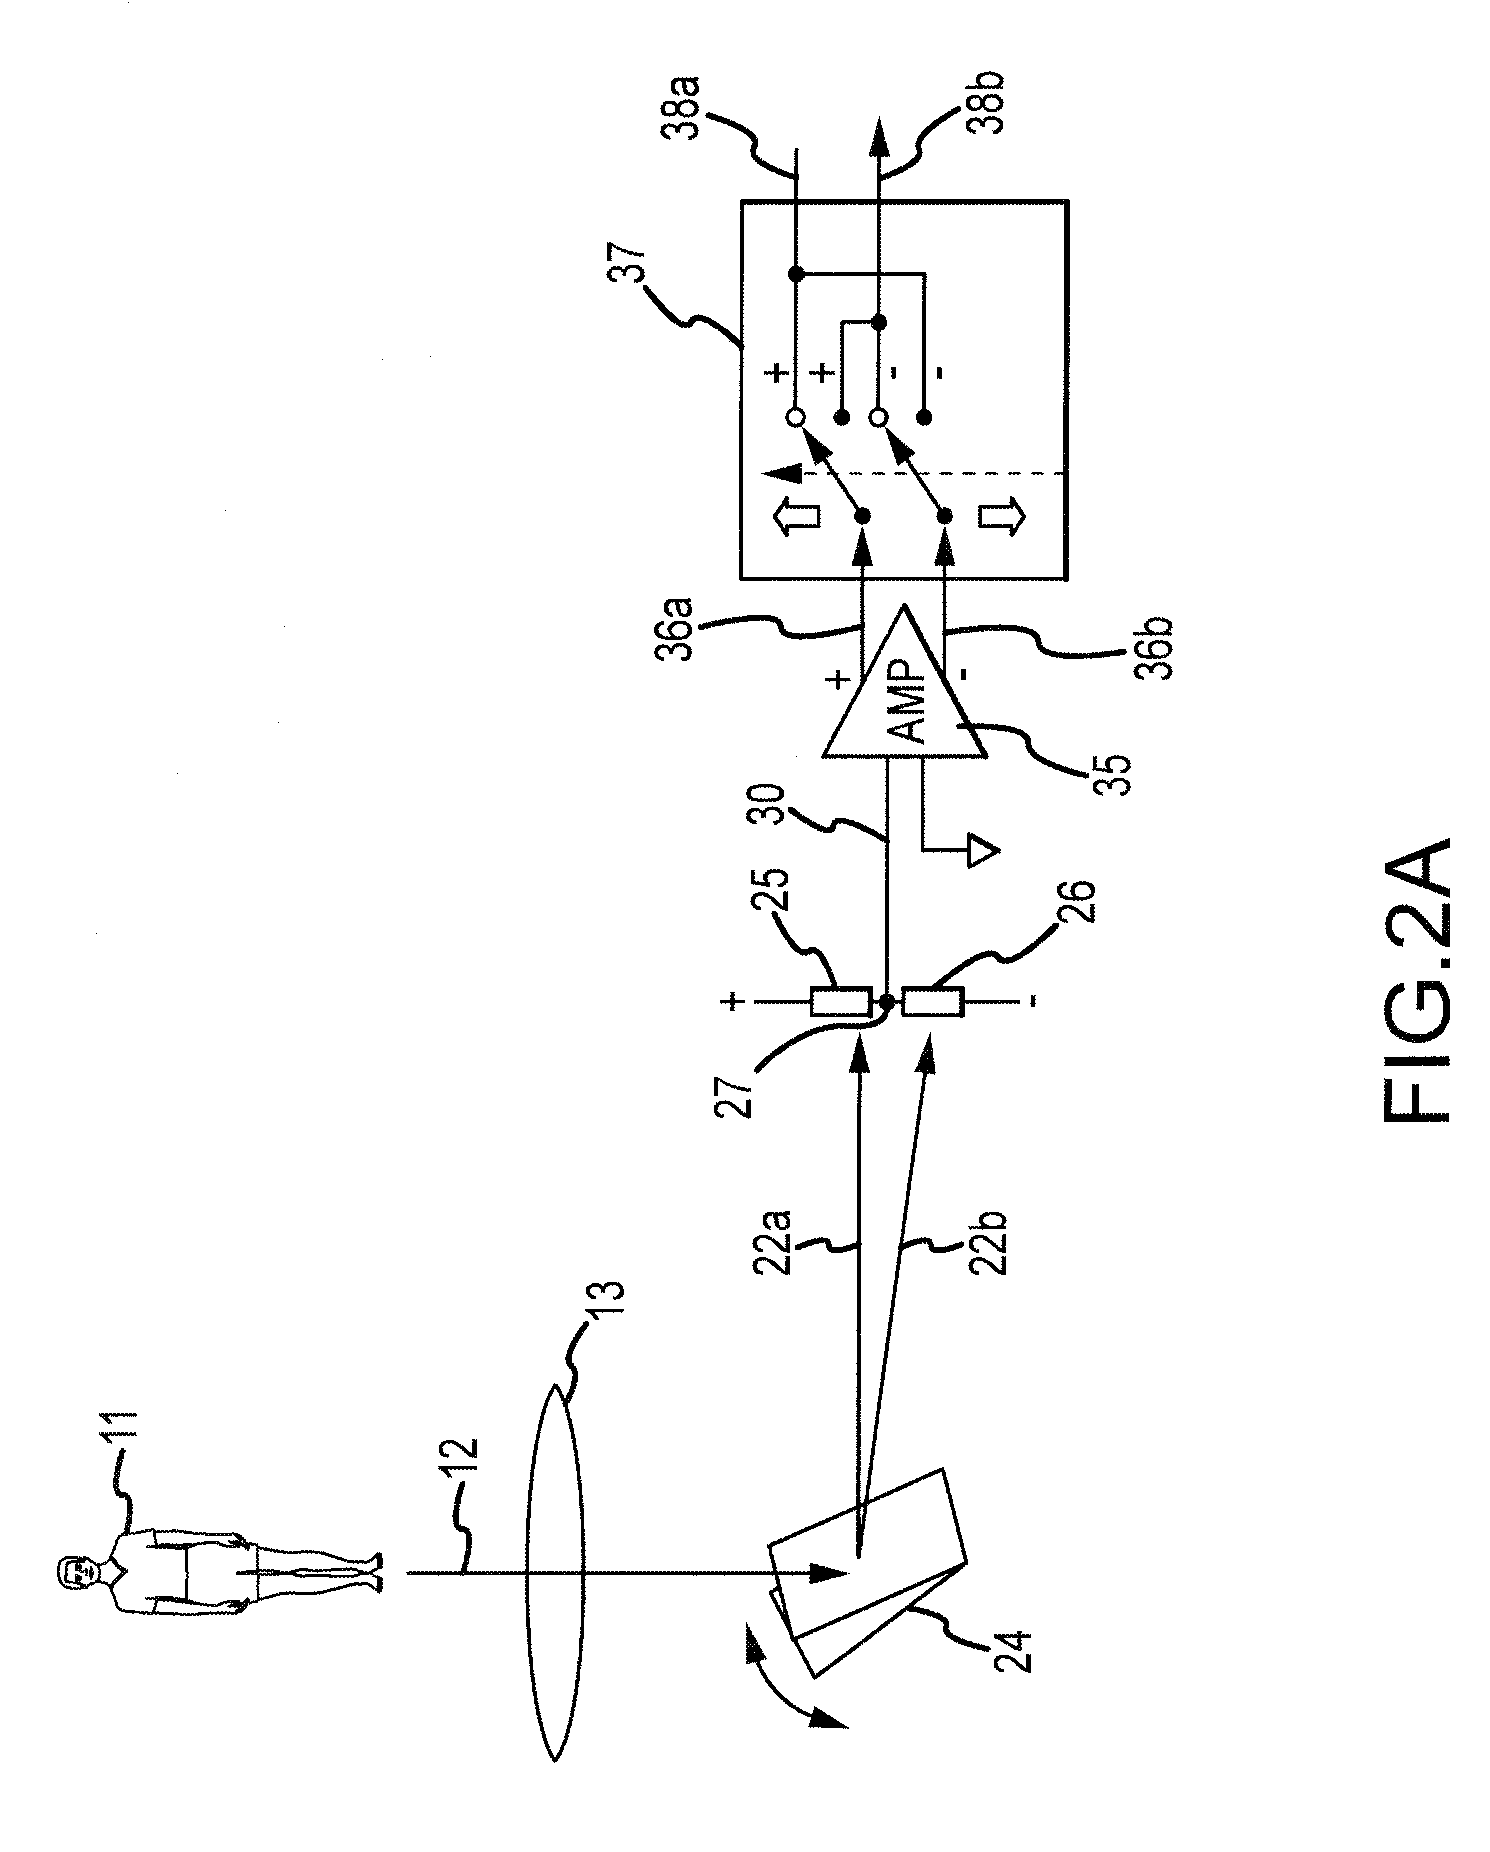 System and method for attenuation of electrical noise